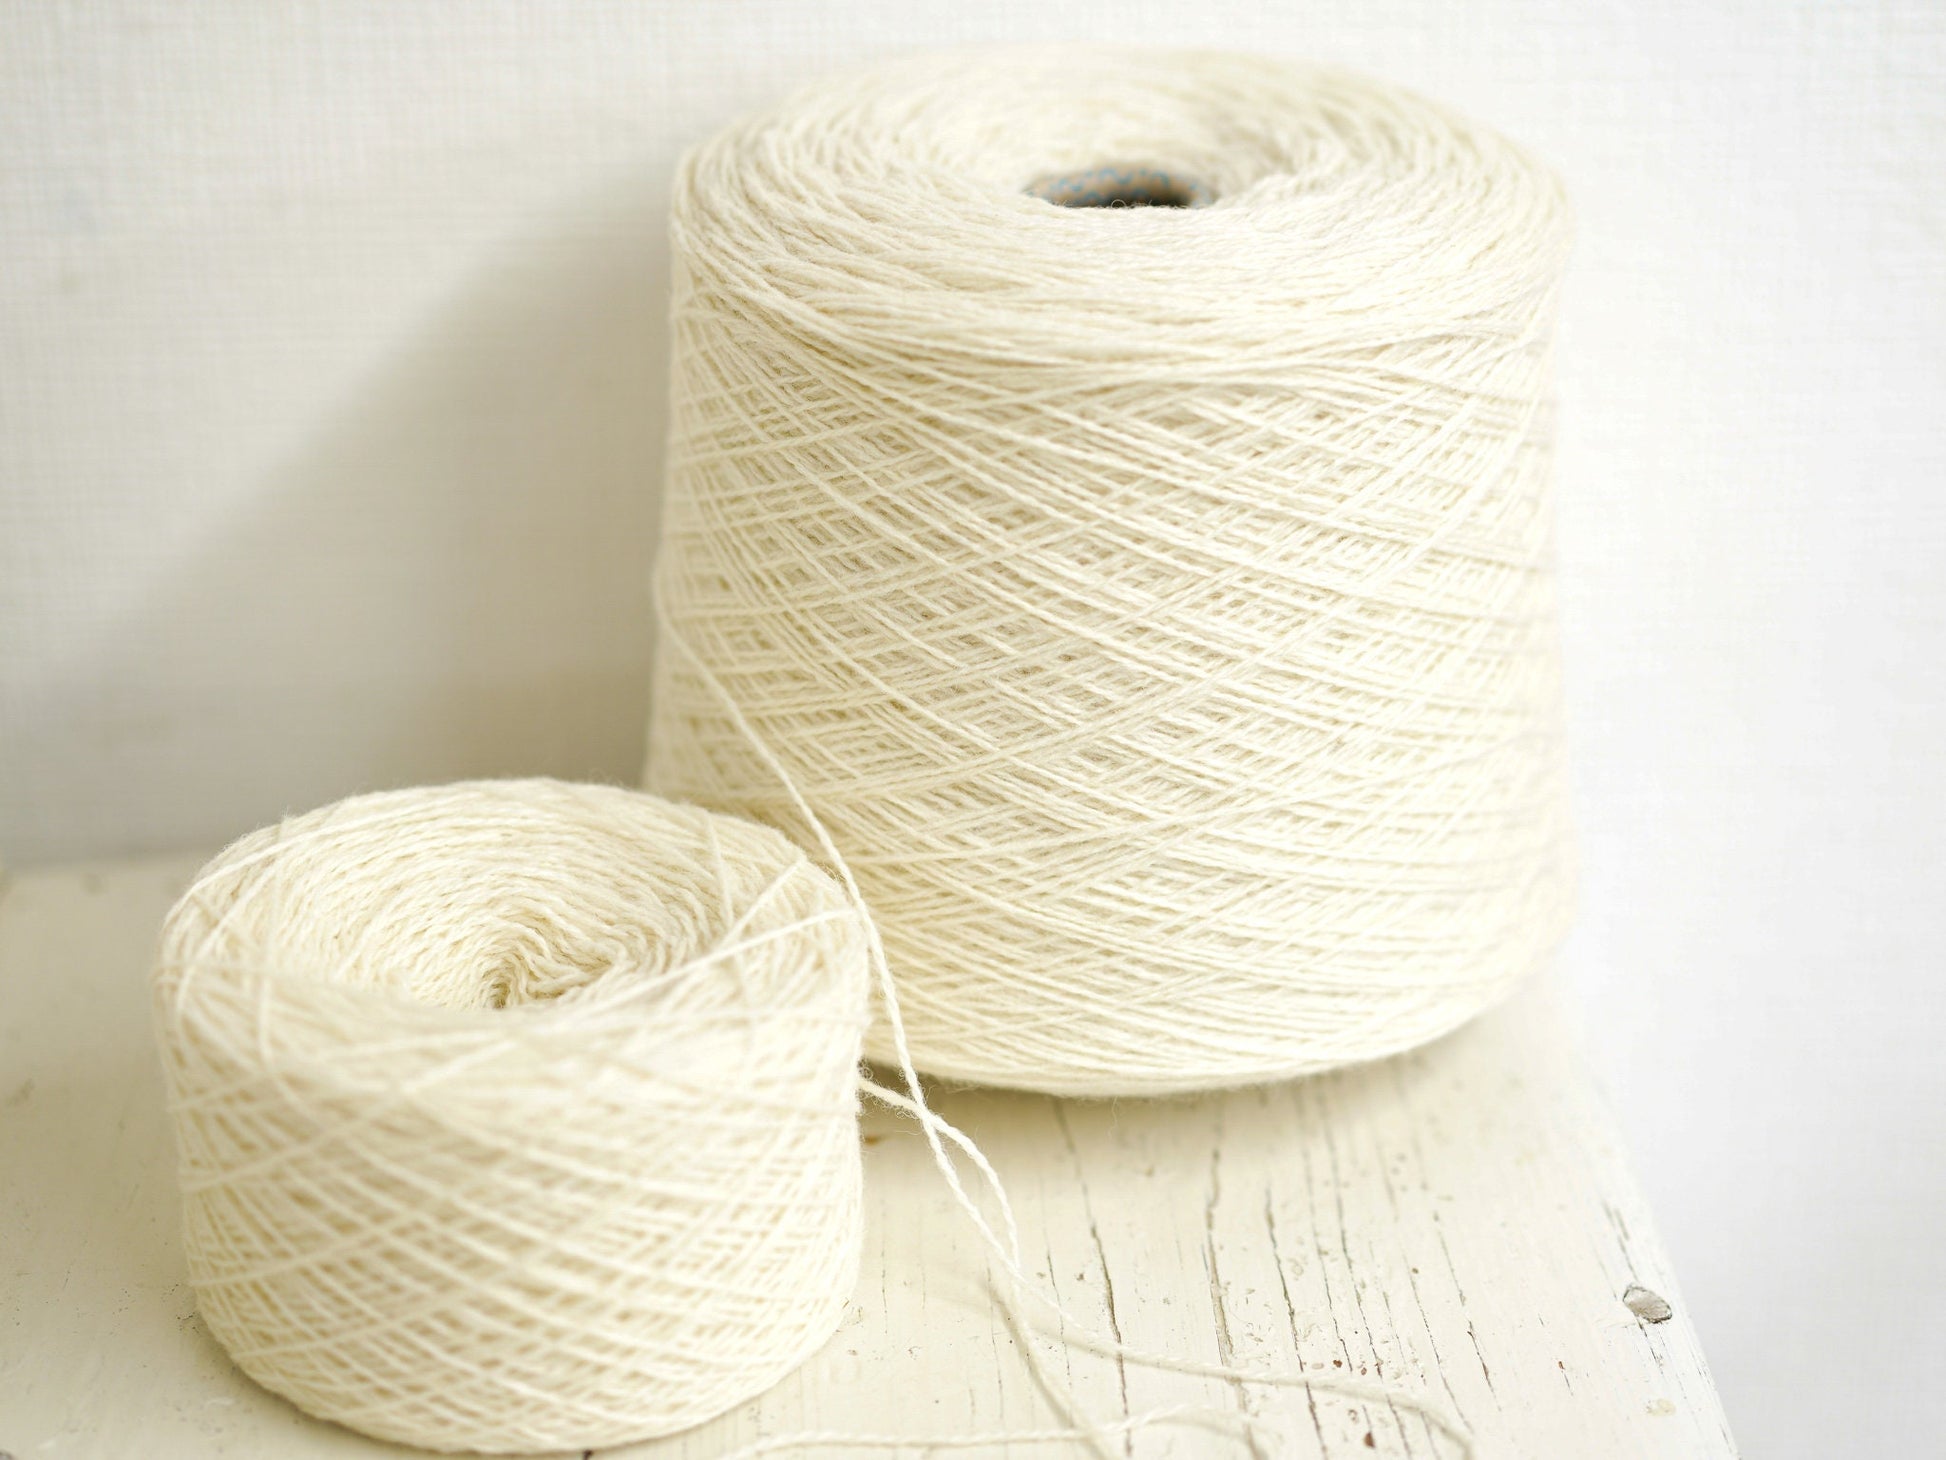 New Zealand White undyed wool yarn in cone